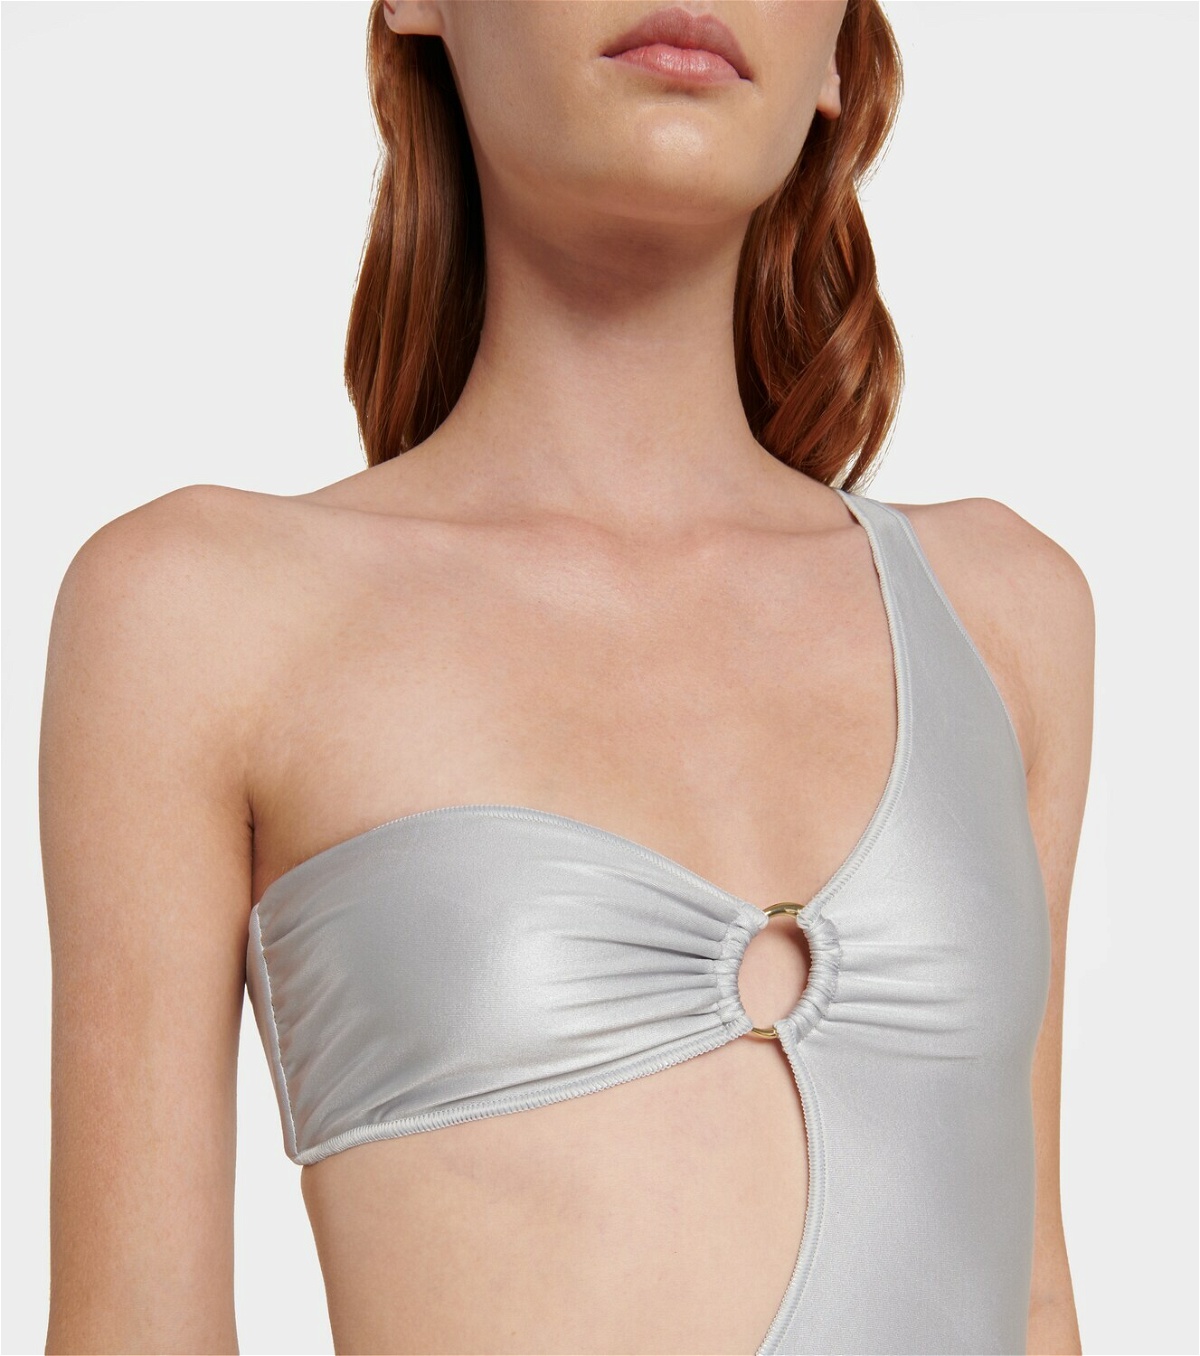 Oseree - Glow one-shoulder swimsuit